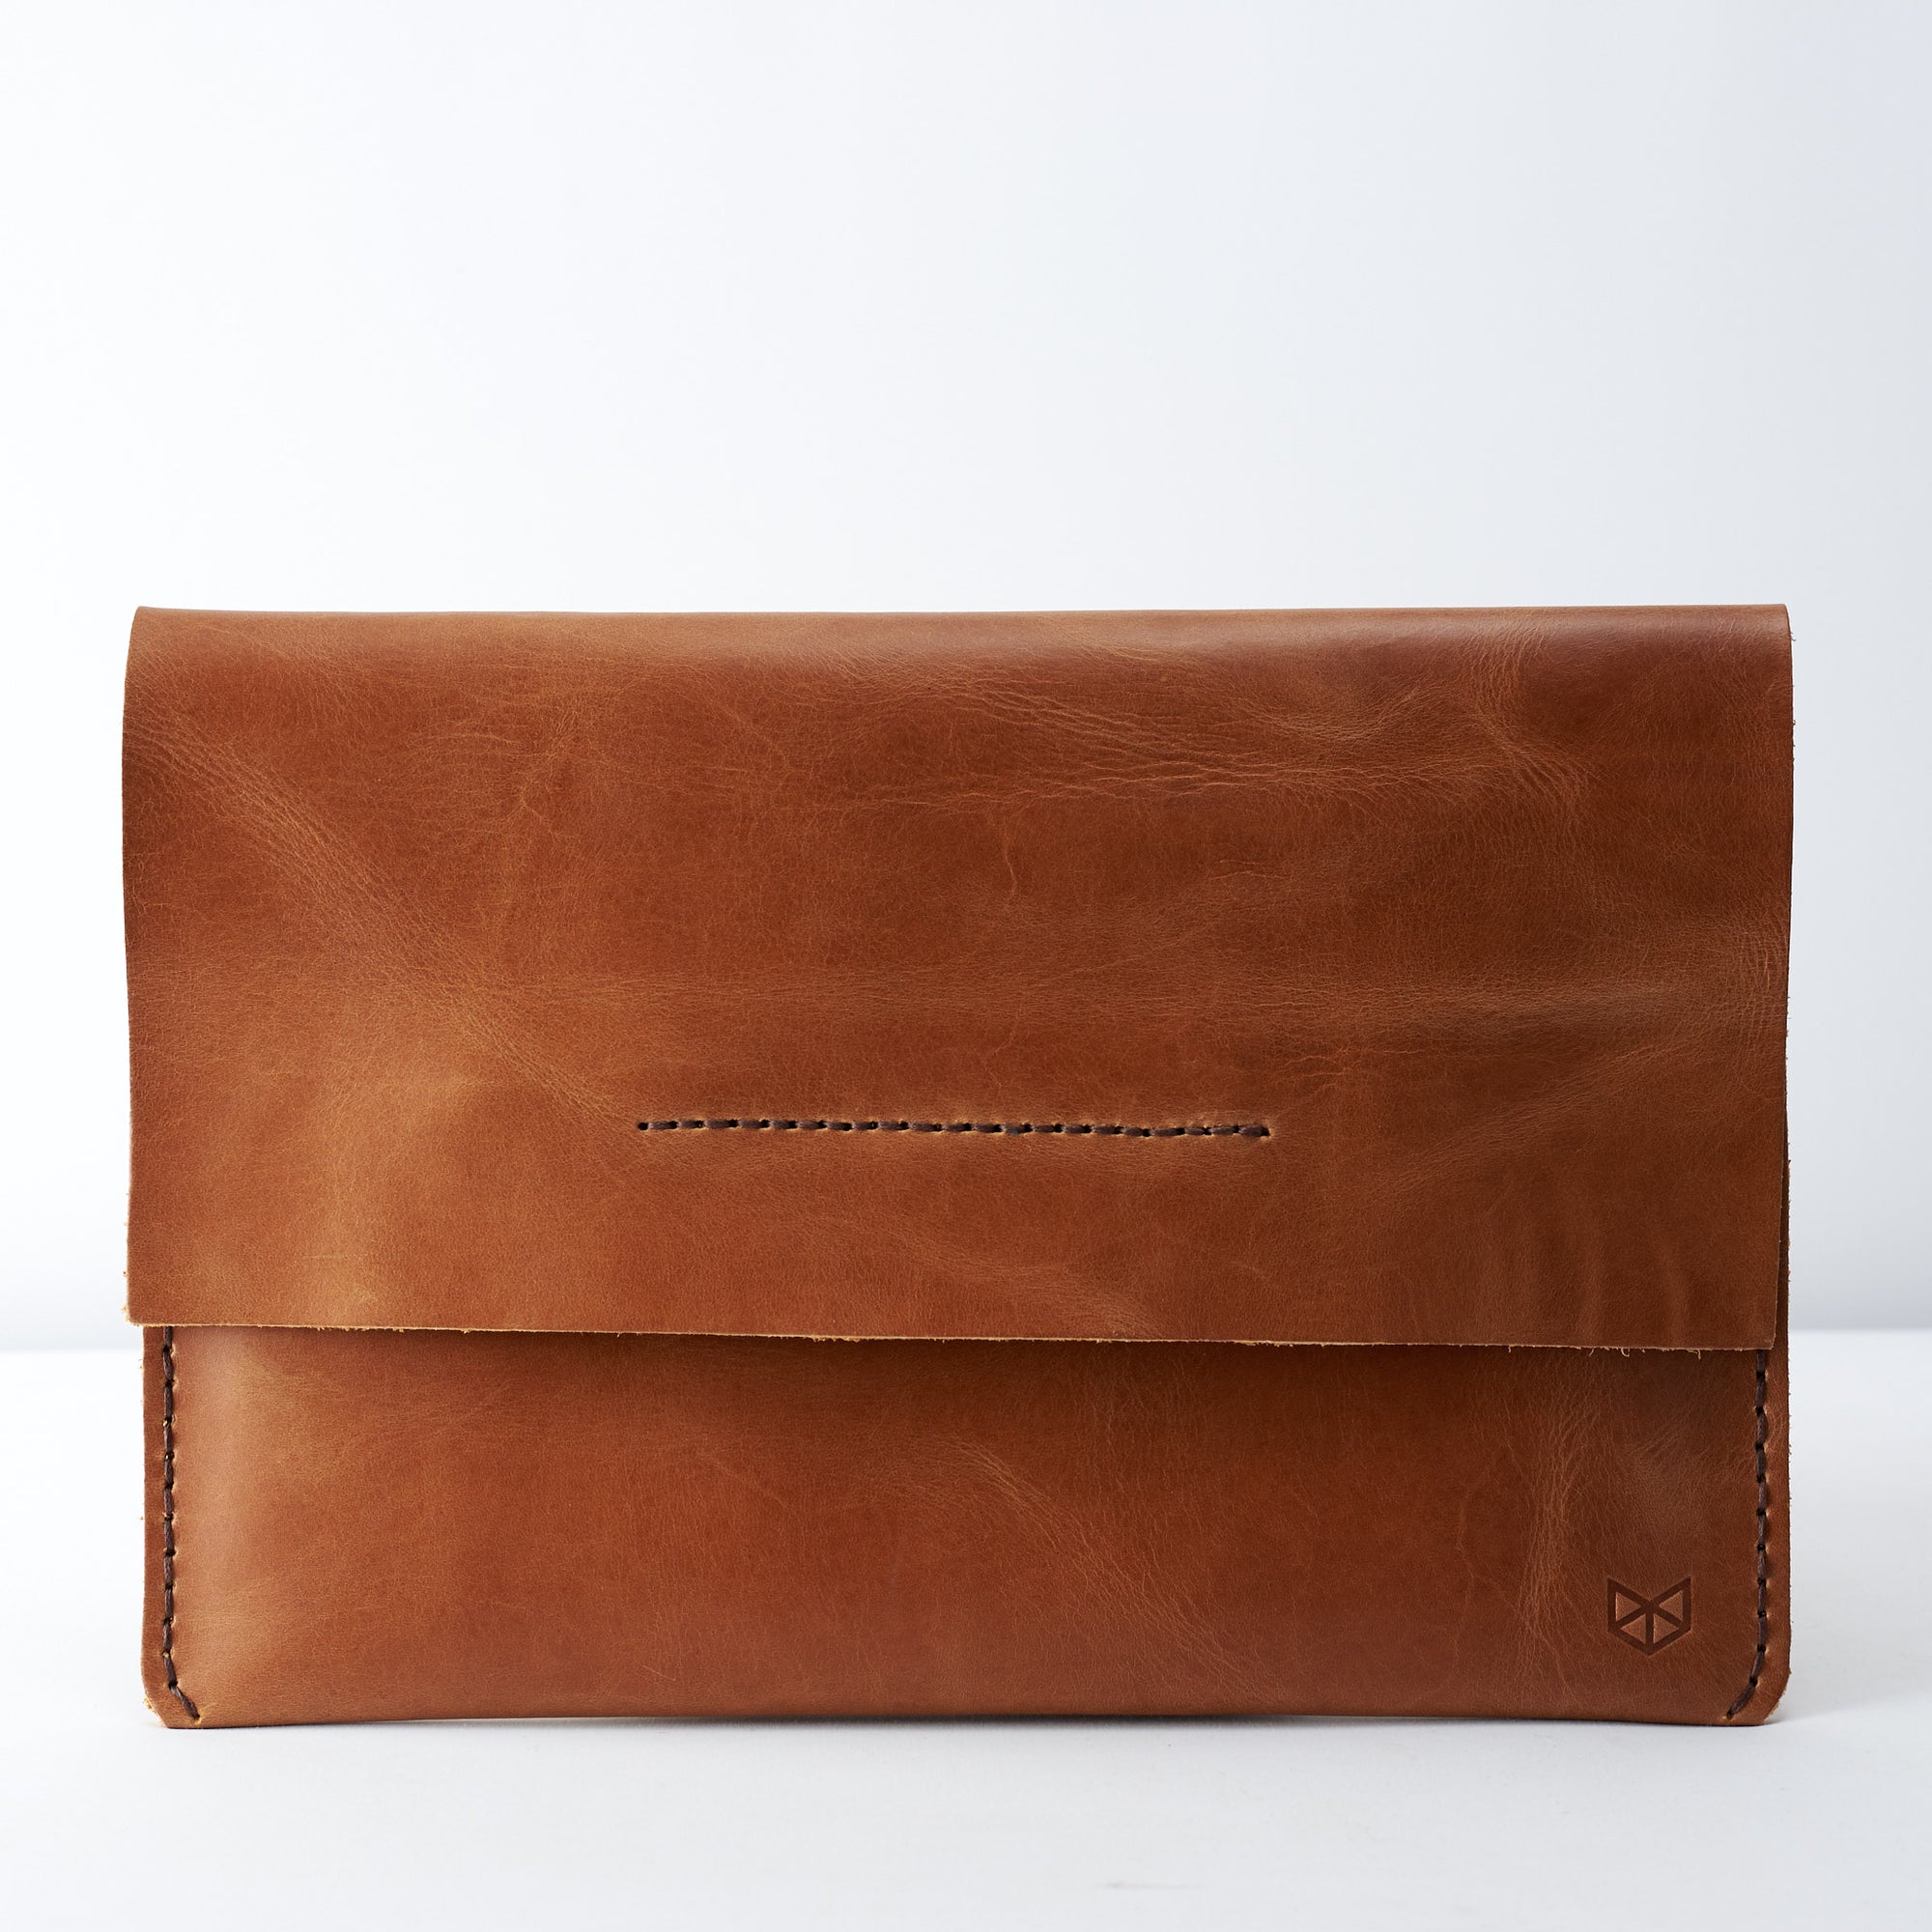 Closed. iPad Sleeve. Leather Case Tan for iPad by Capra Leather